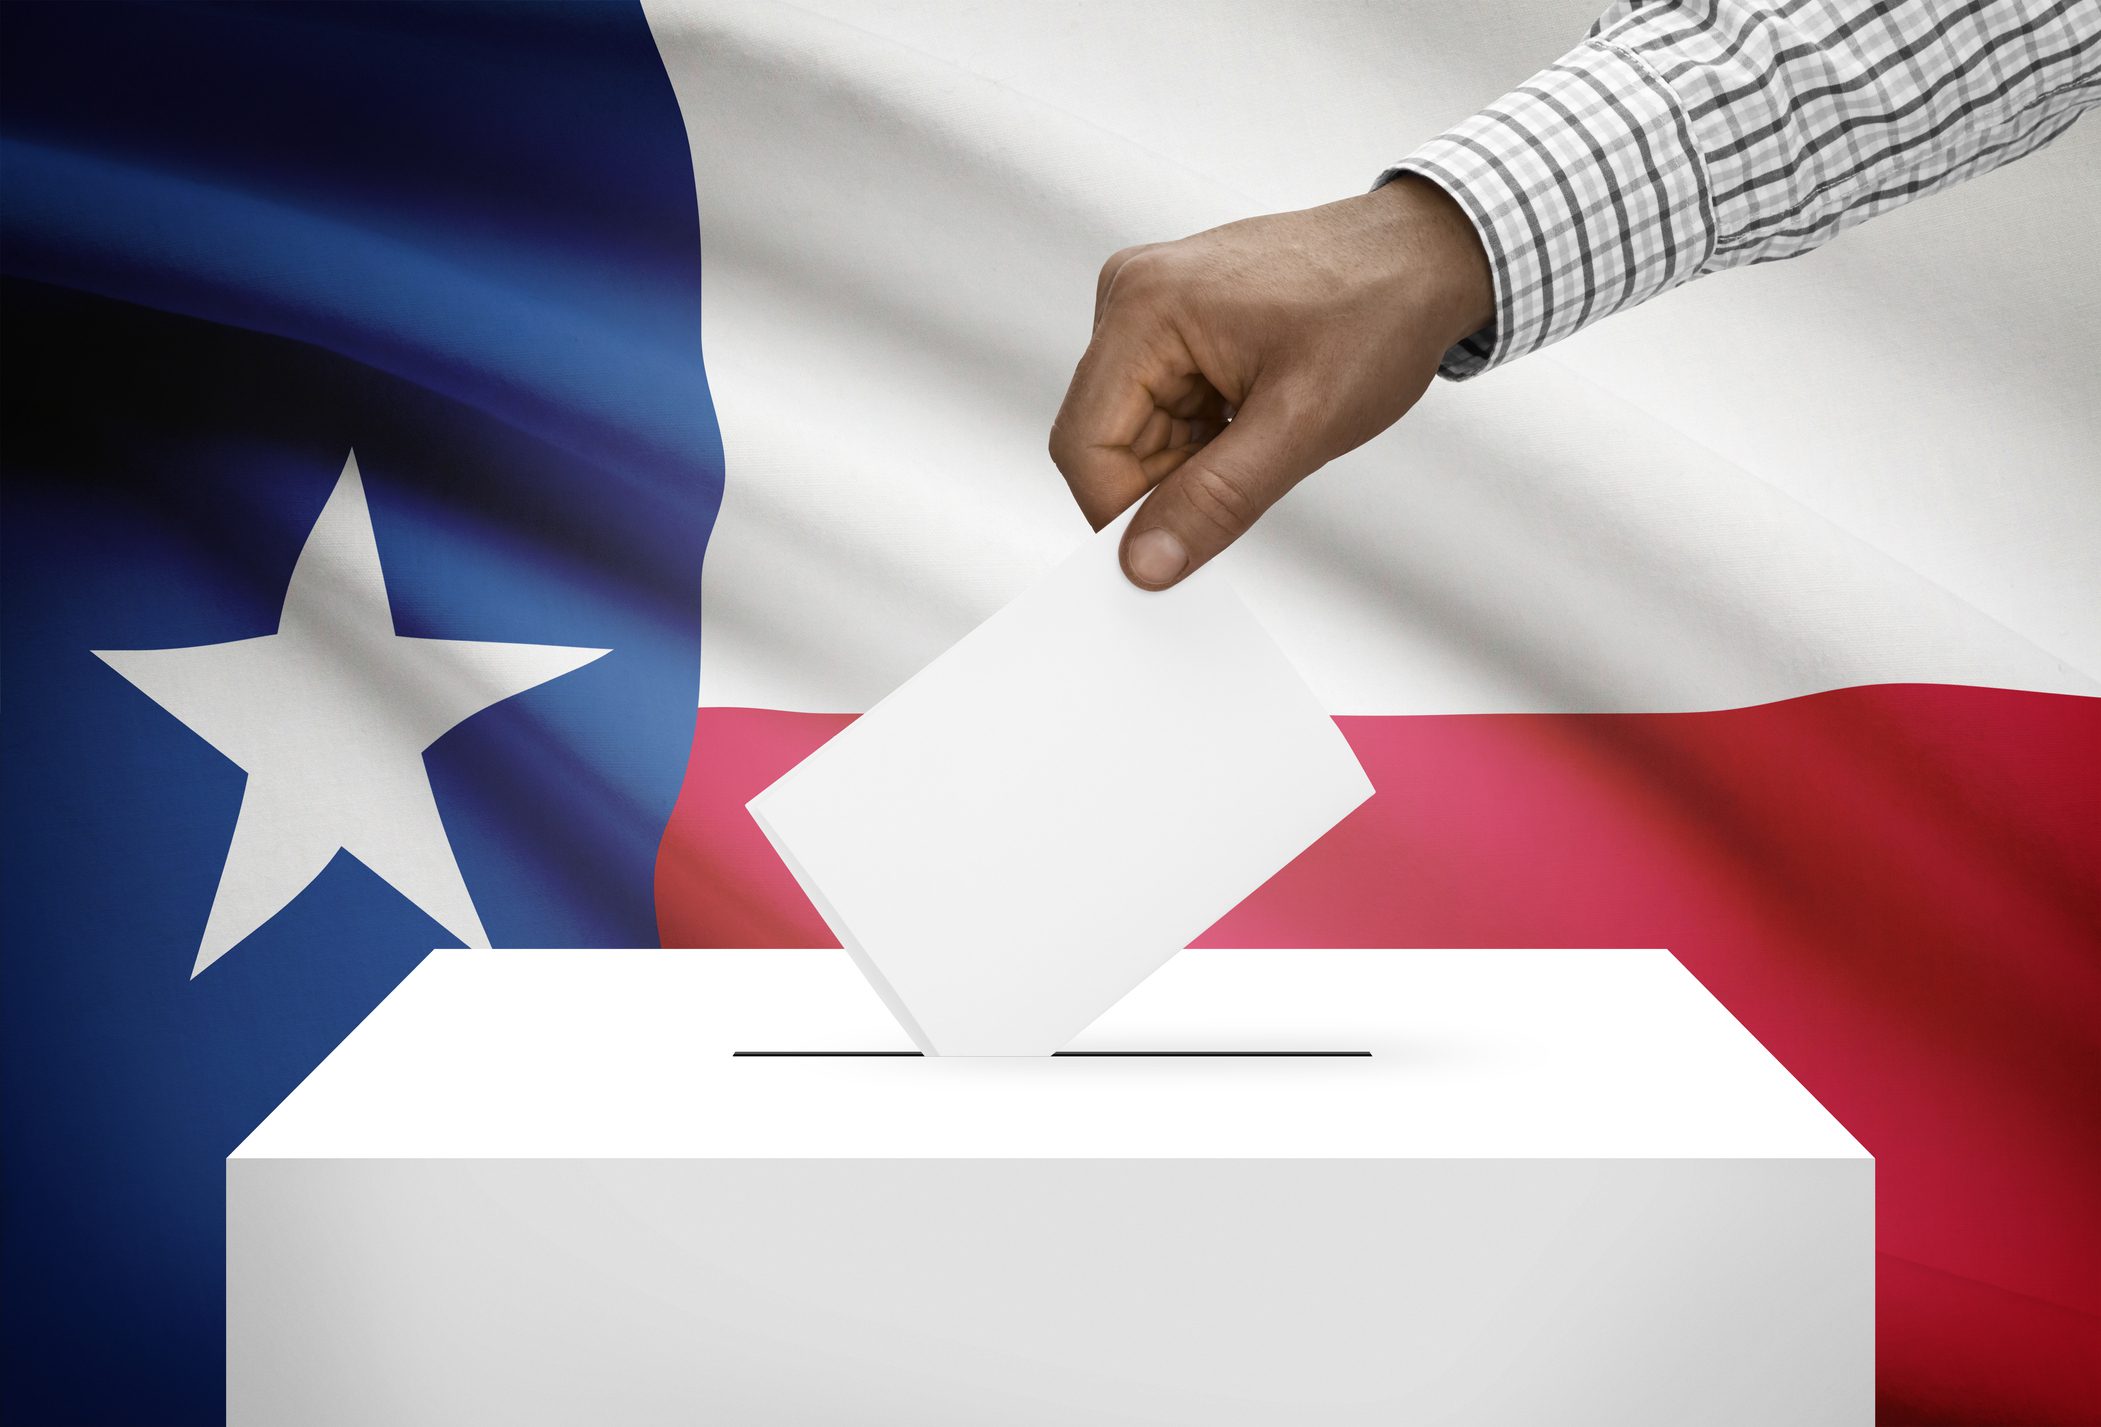 Ballot box with US state flag on background - Texas